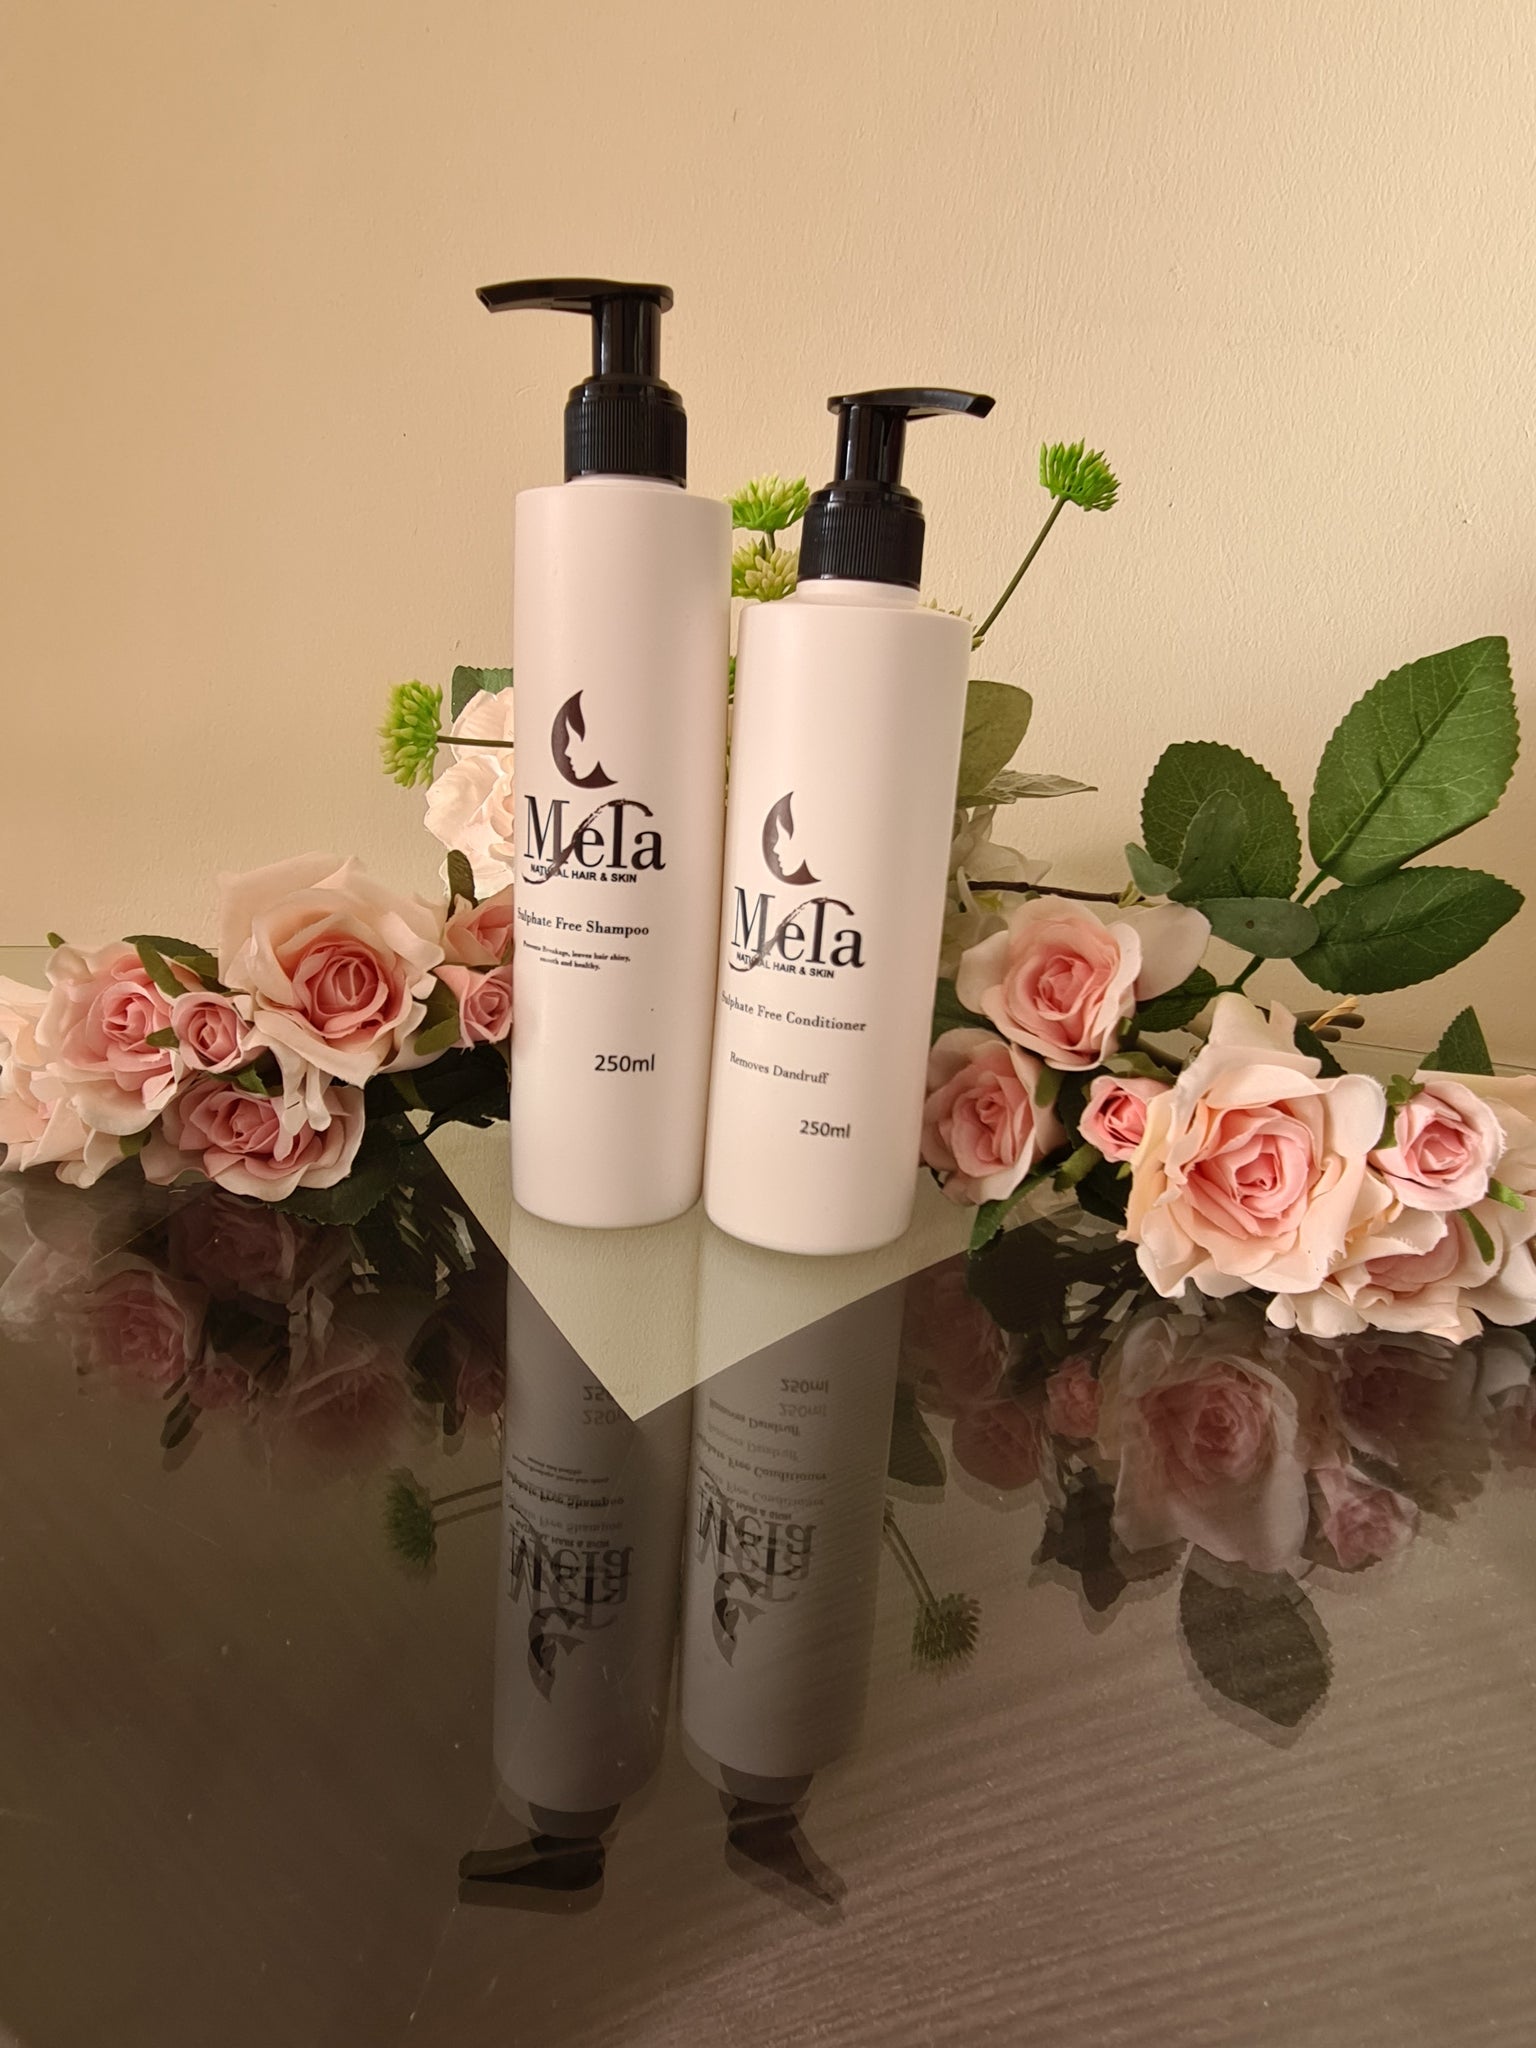 Sulphate free shampoo and conditioner special - Mela Natural Hair and Skin